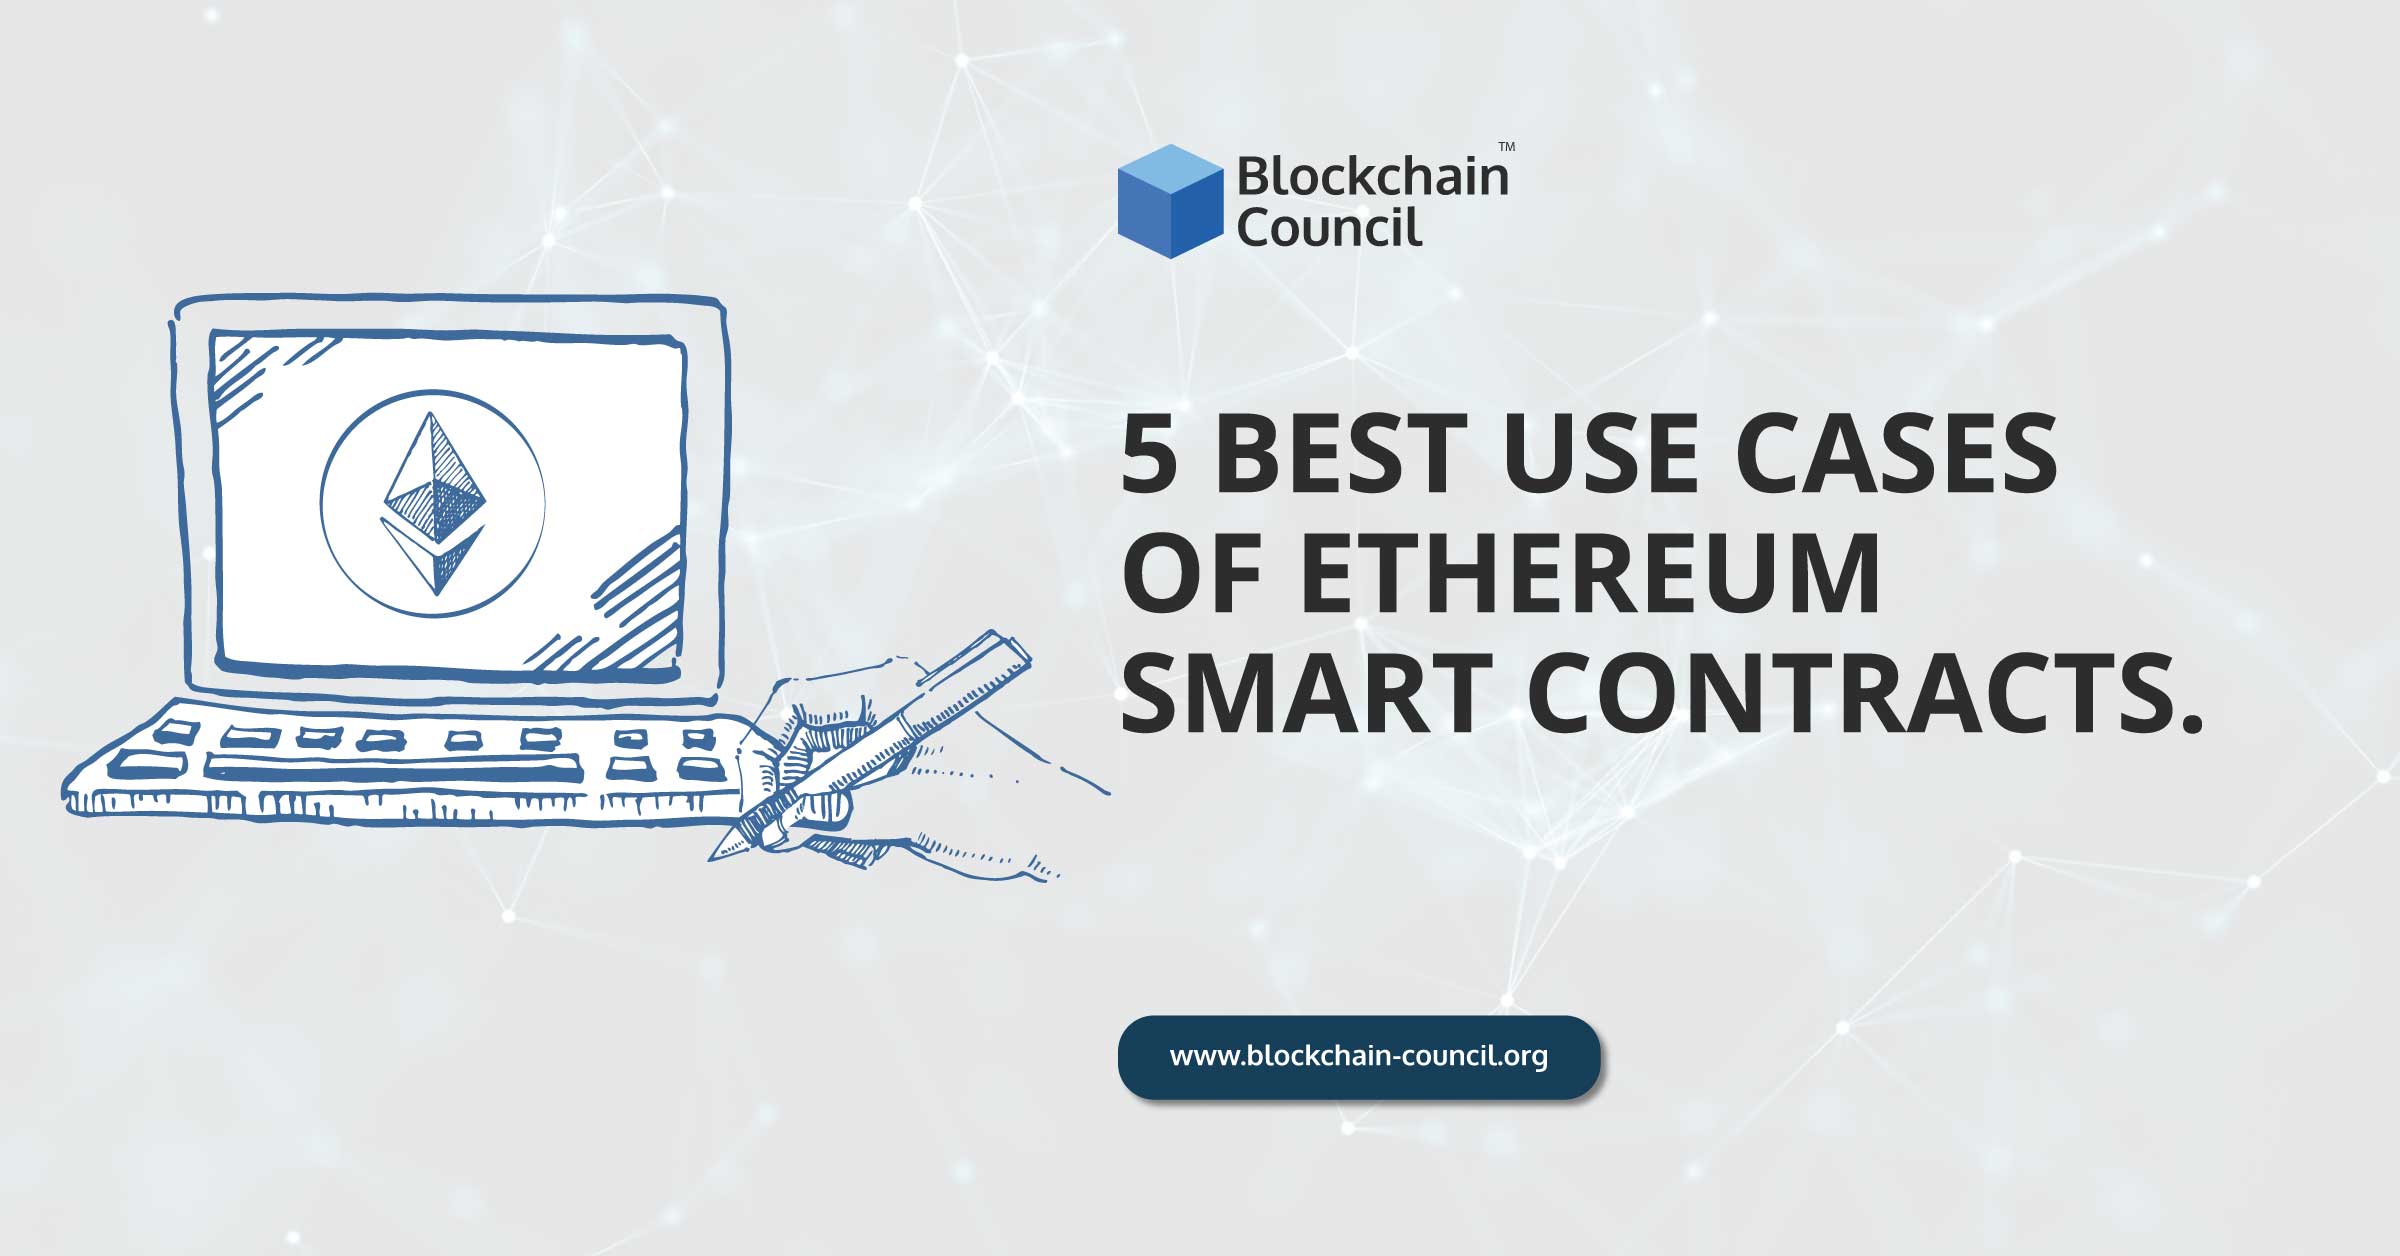 5 Best Use Cases of Ethereum Smart Contracts